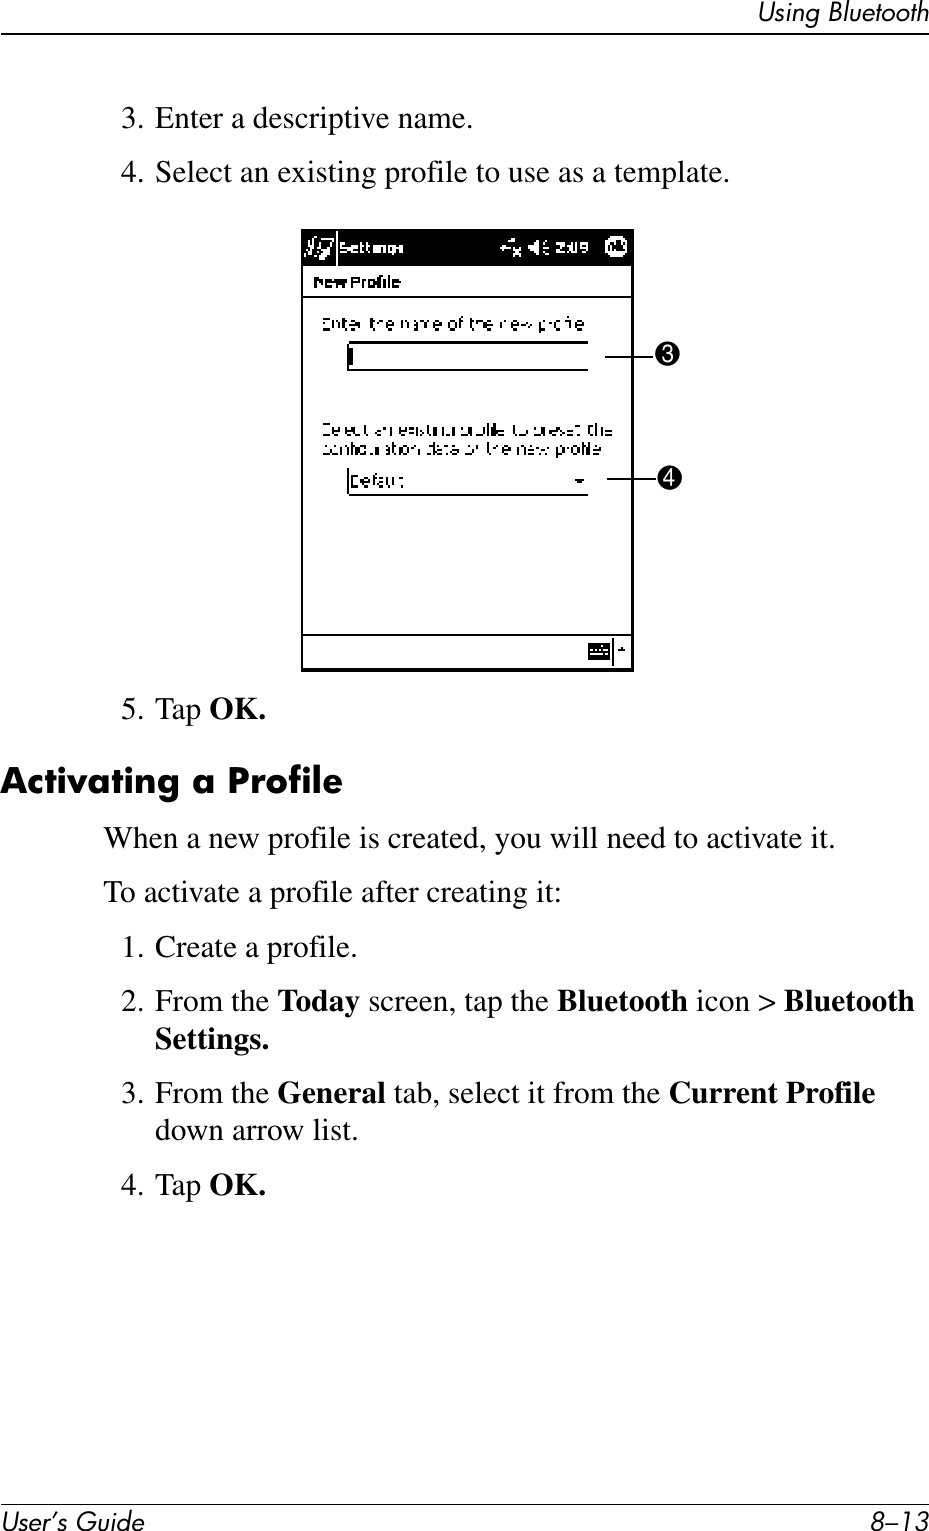 Using BluetoothUser’s Guide 8–133. Enter a descriptive name.4. Select an existing profile to use as a template.5. Tap OK.Activating a ProfileWhen a new profile is created, you will need to activate it.To activate a profile after creating it:1. Create a profile.2. From the Today screen, tap the Bluetooth icon &gt; Bluetooth Settings.3. From the General tab, select it from the Current Profile down arrow list.4. Tap OK.34